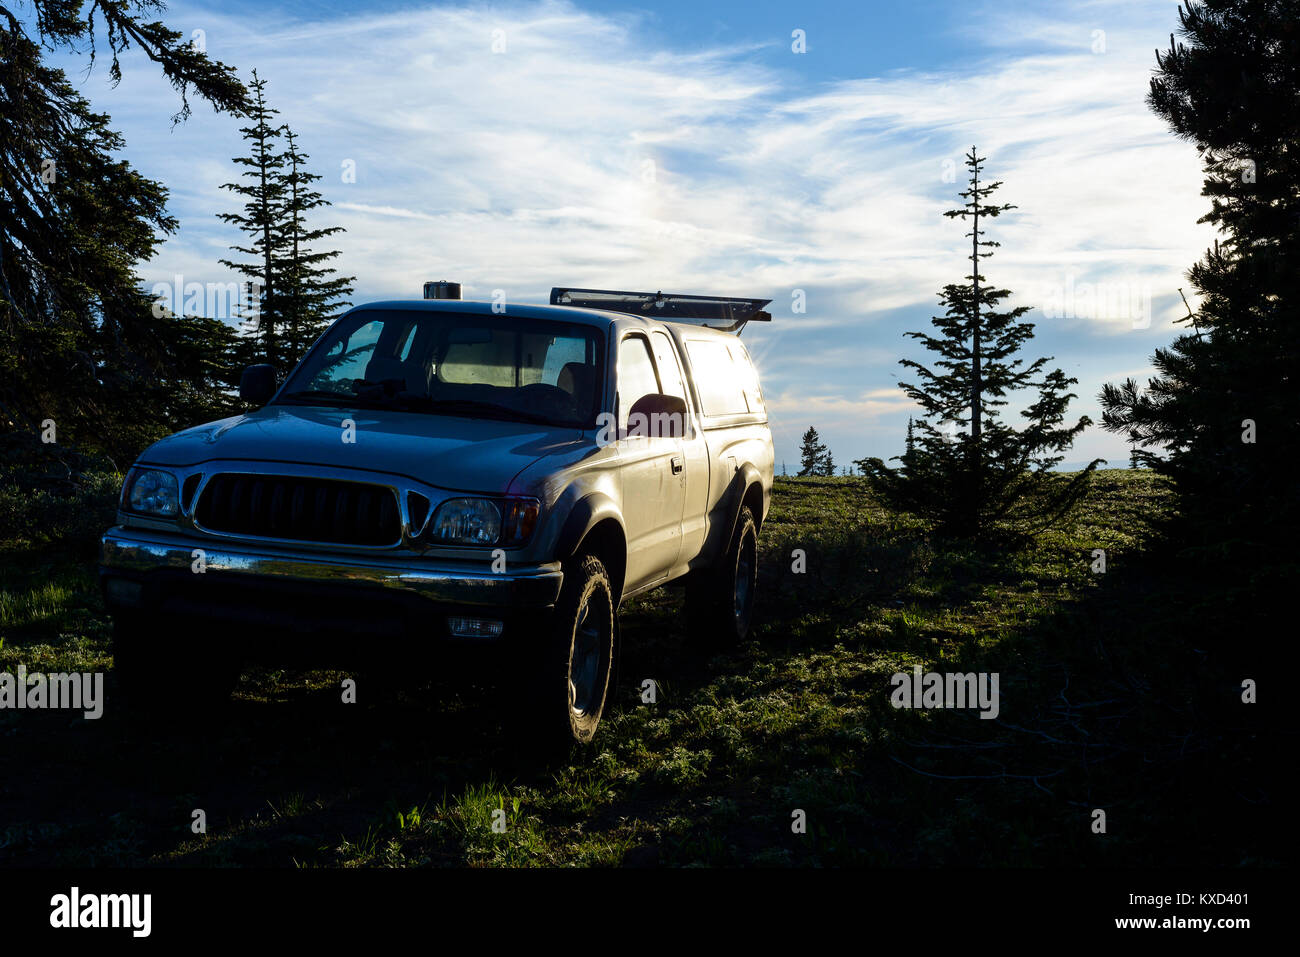 Sports Utility Vehicle on grassy field against cloudy sky Stock Photo